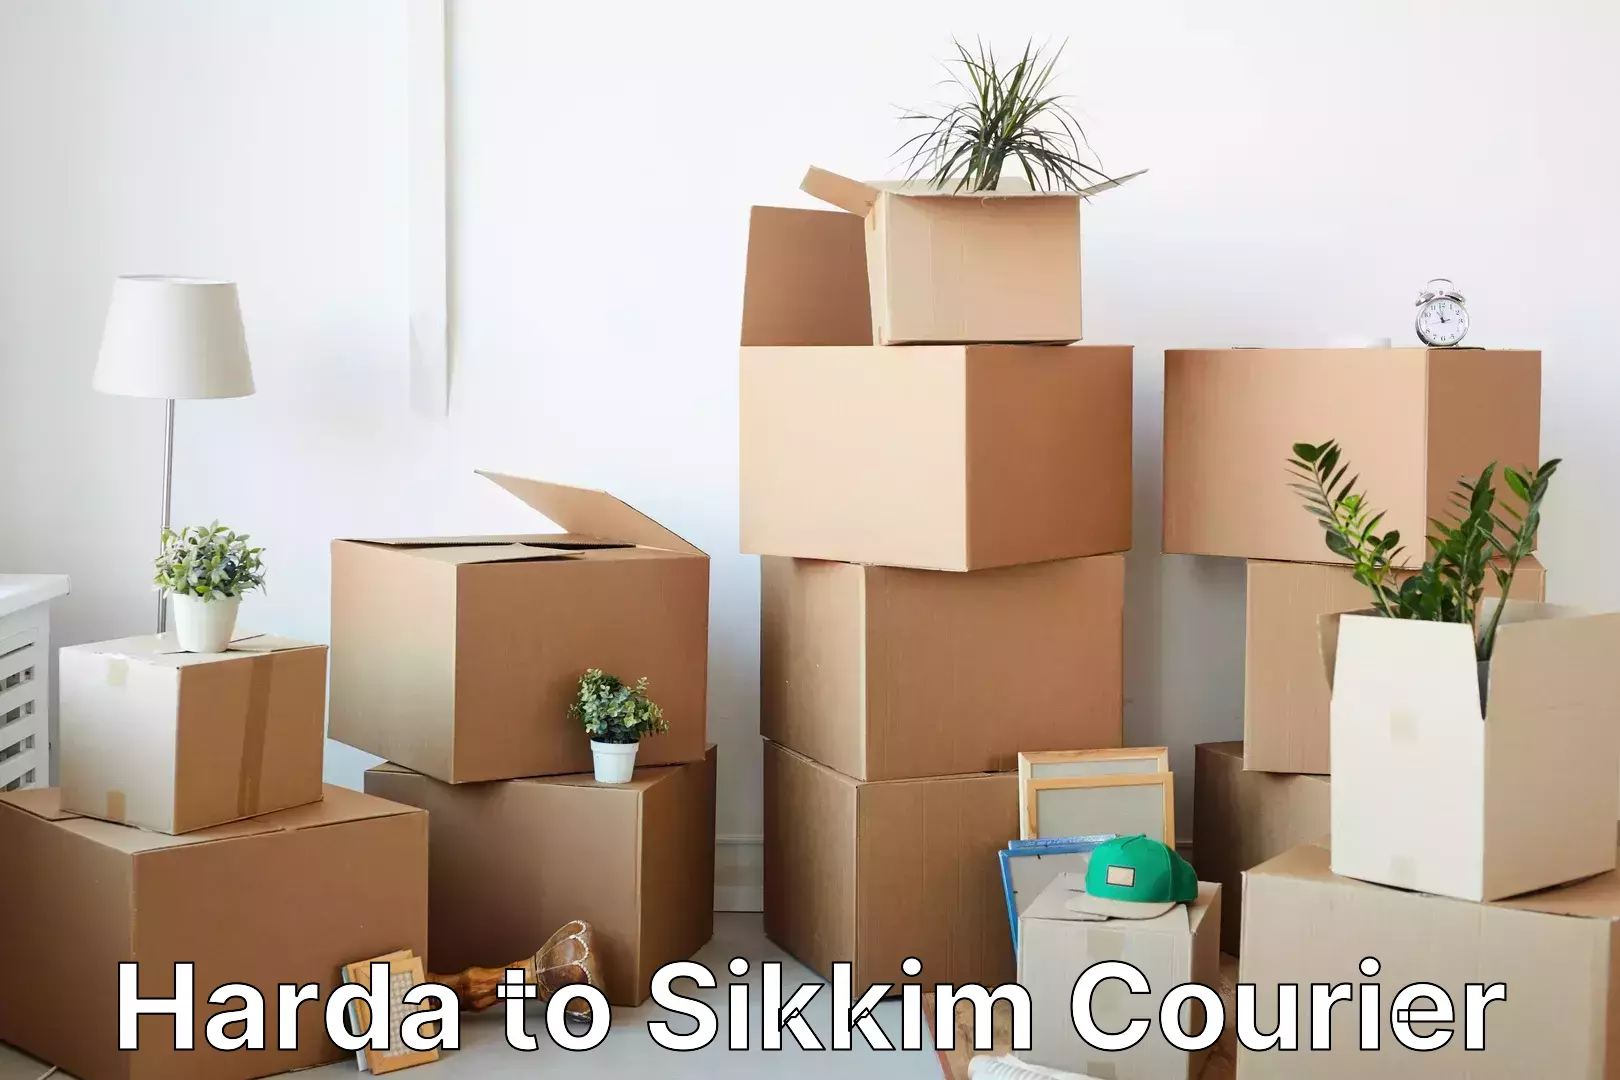 Flexible delivery schedules Harda to Sikkim